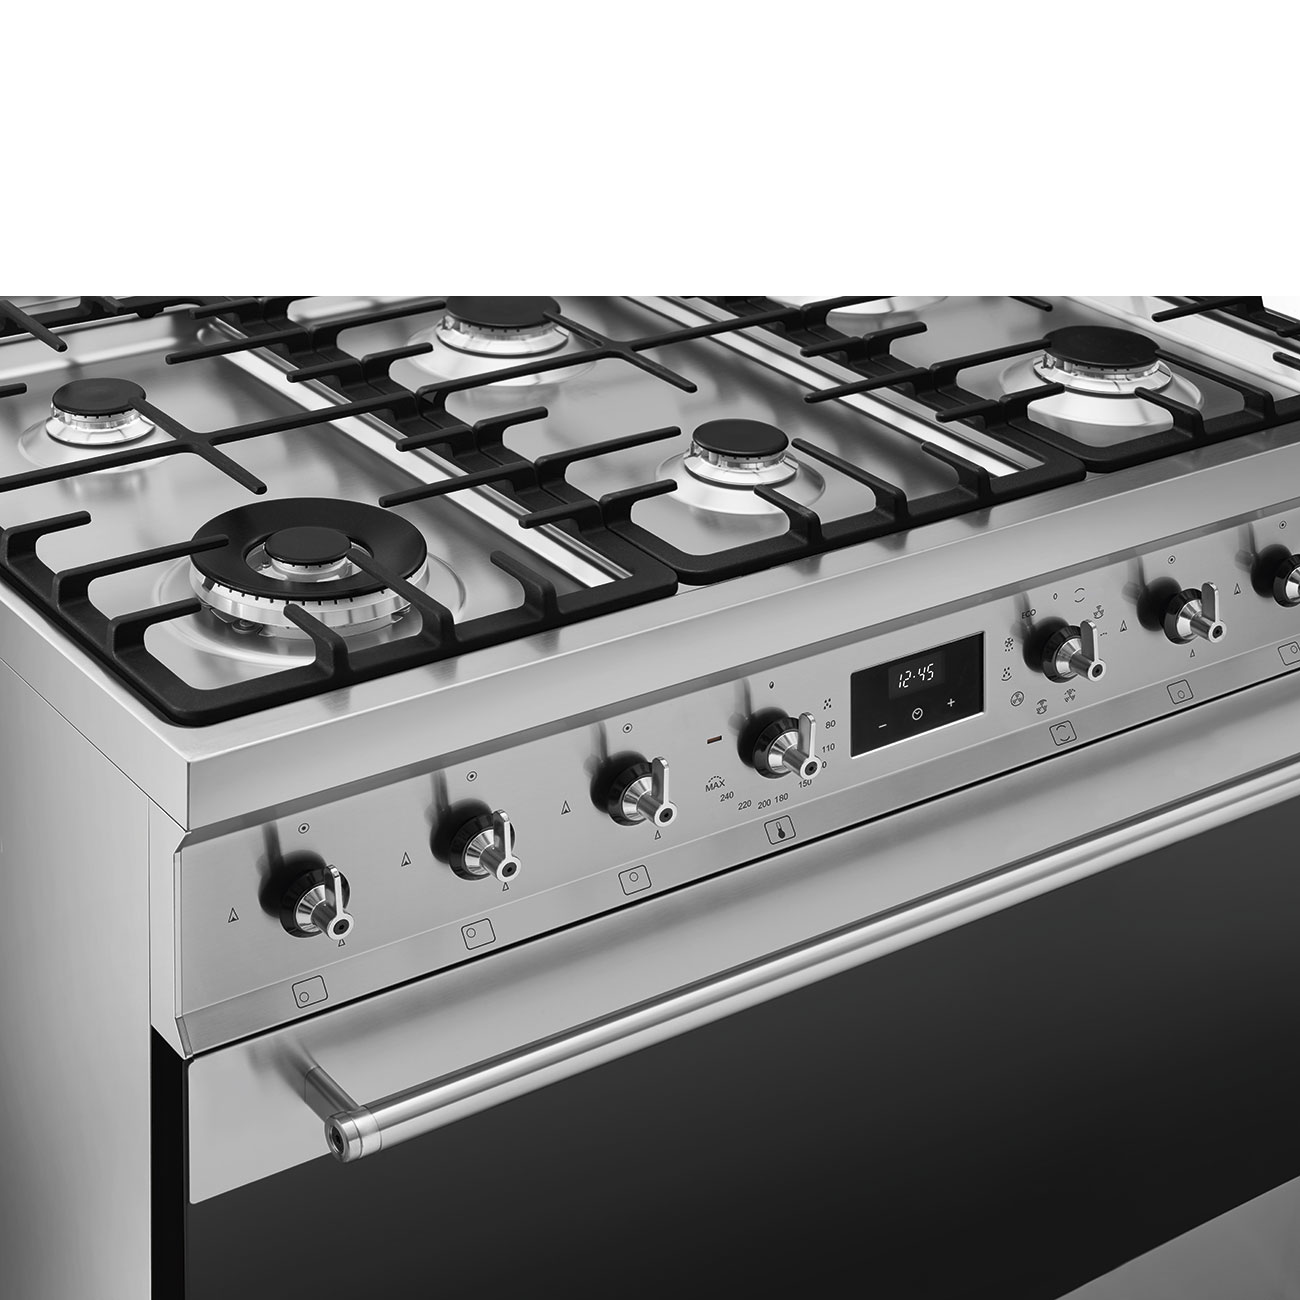 Smeg Stainless steel Cooker with Gas Hob_7